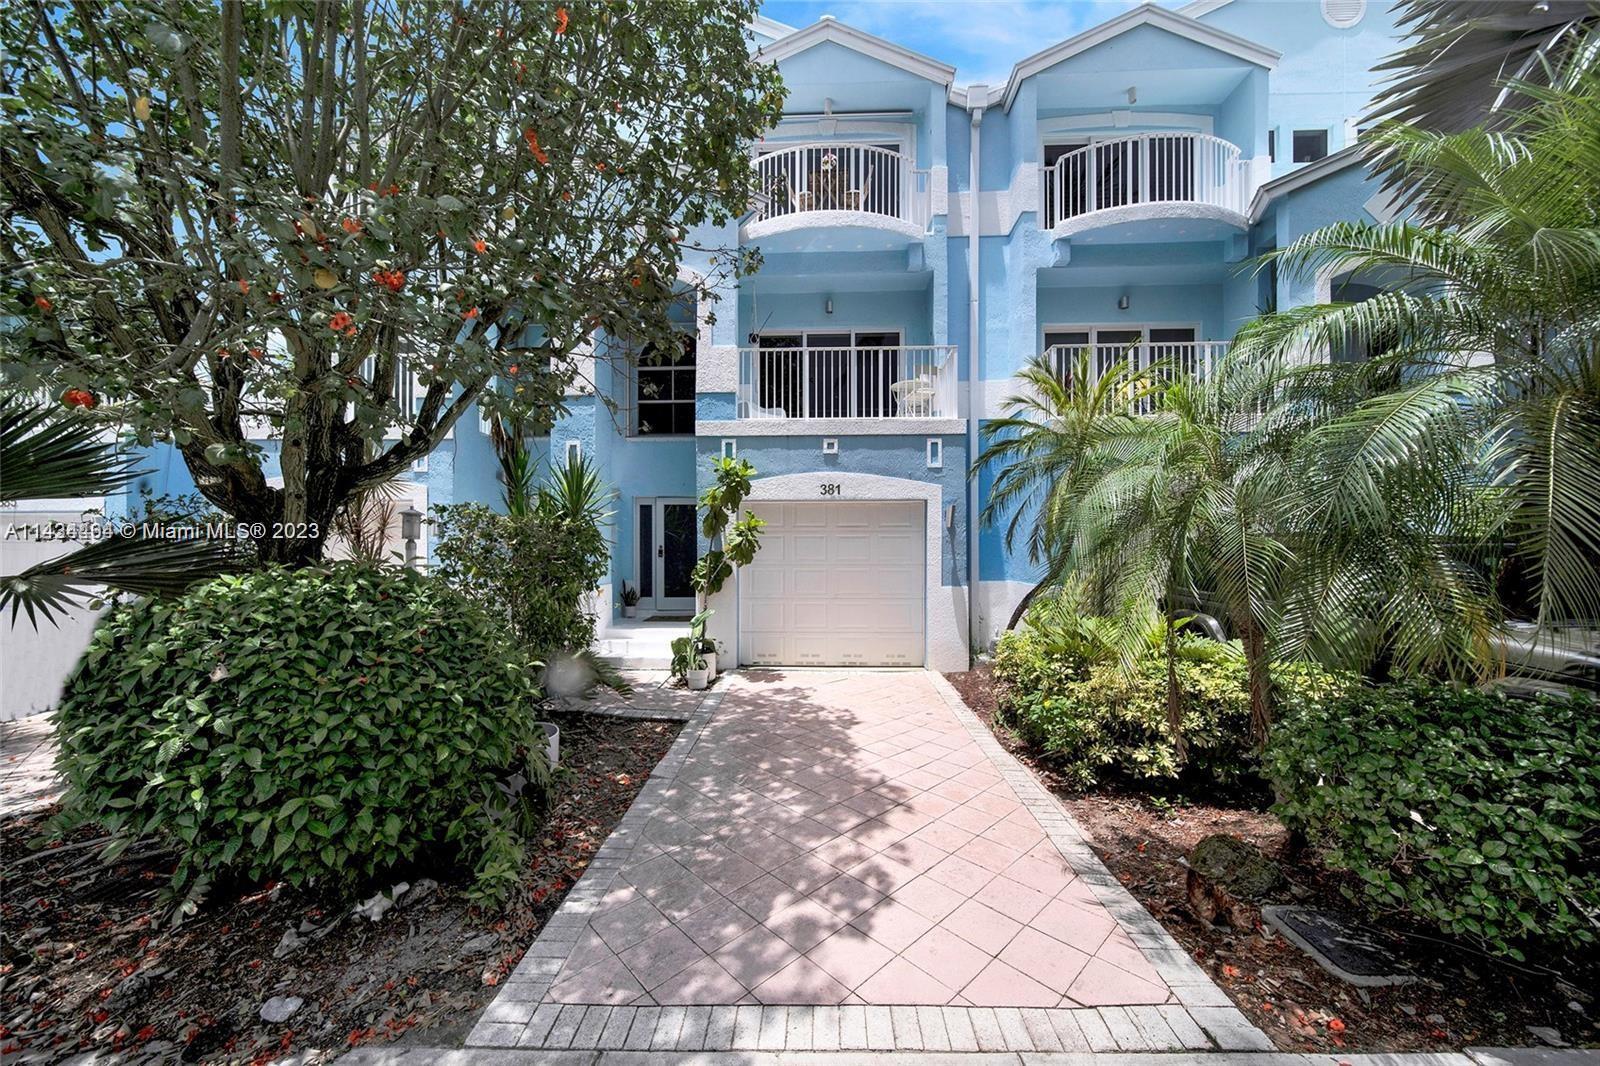 Photo of 381 Franklin St in Hollywood, FL